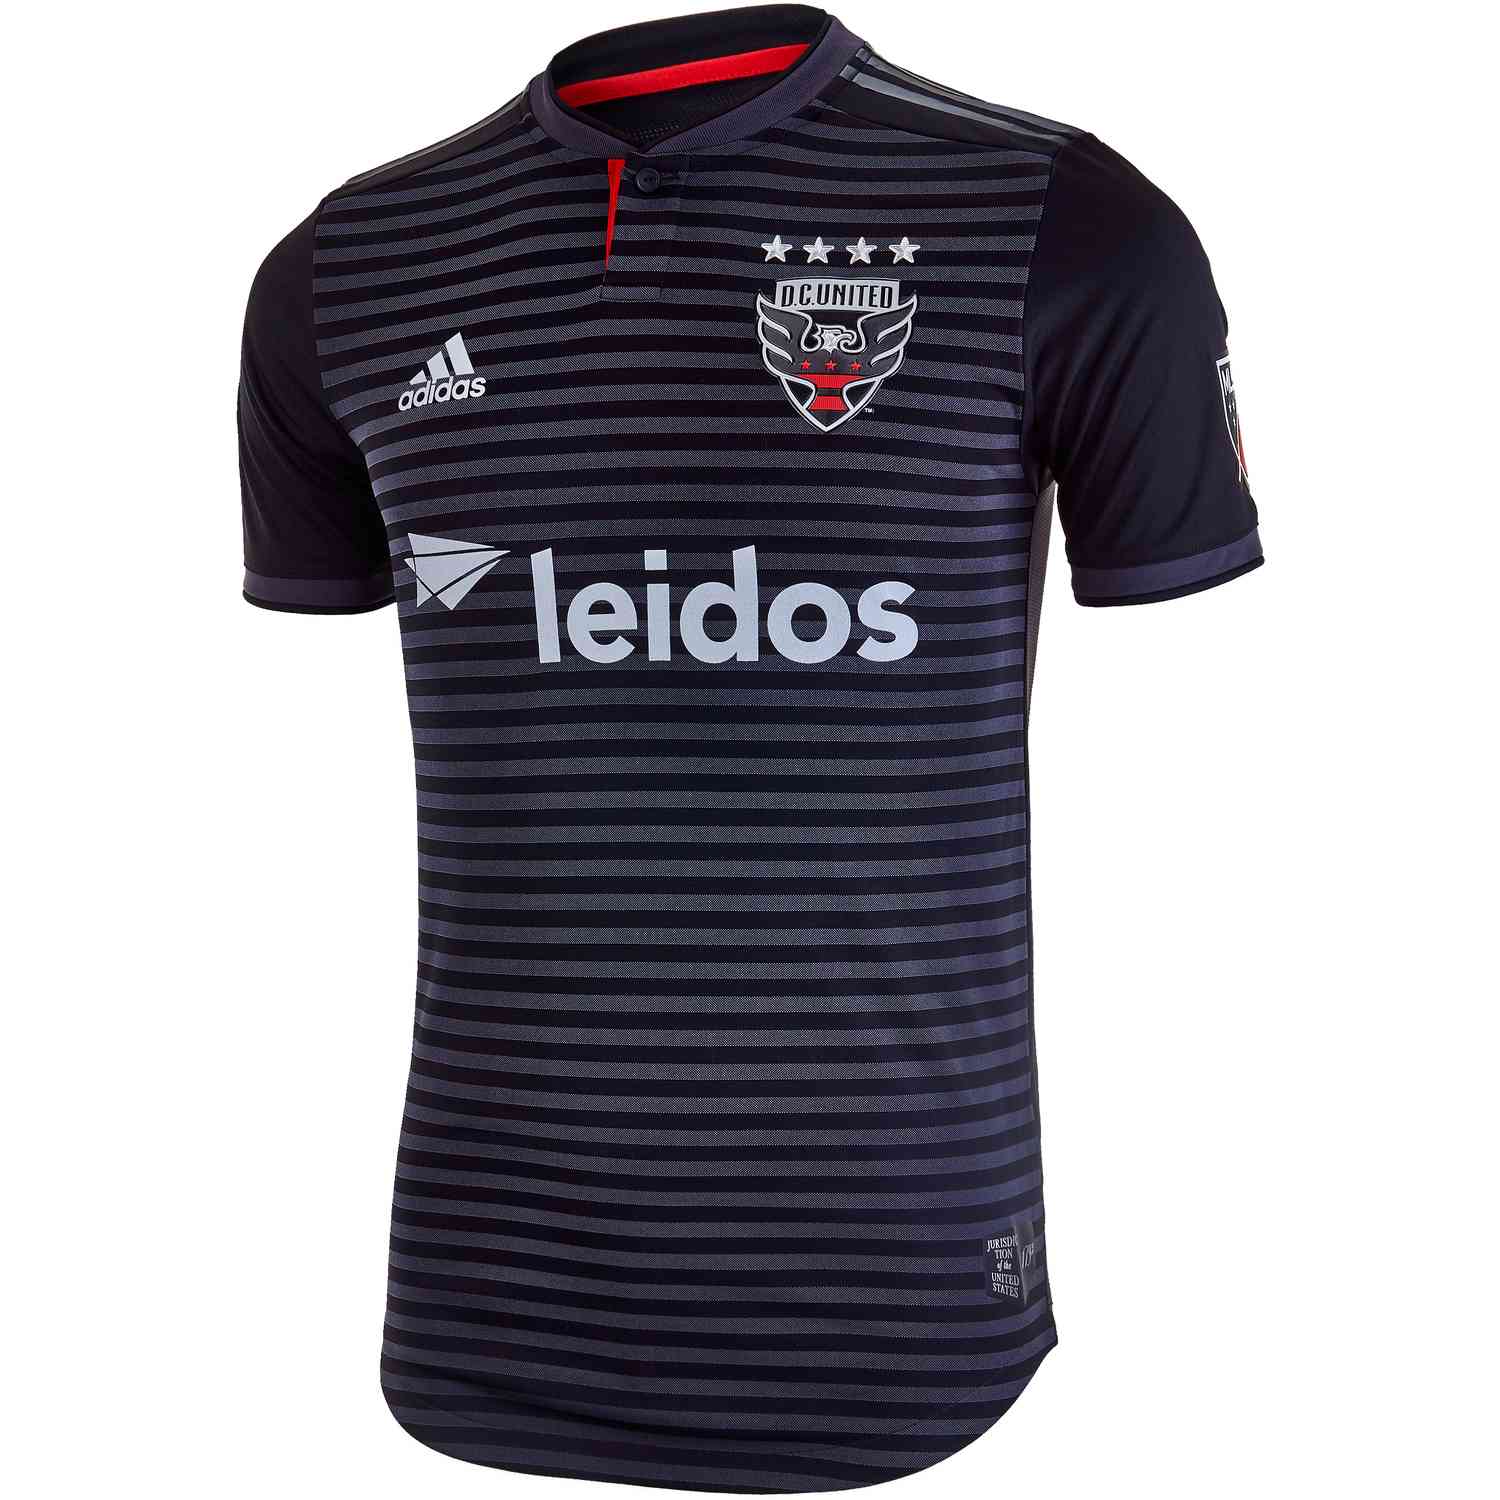 2018/19 adidas DC United Home Authentic Jersey SoccerPro